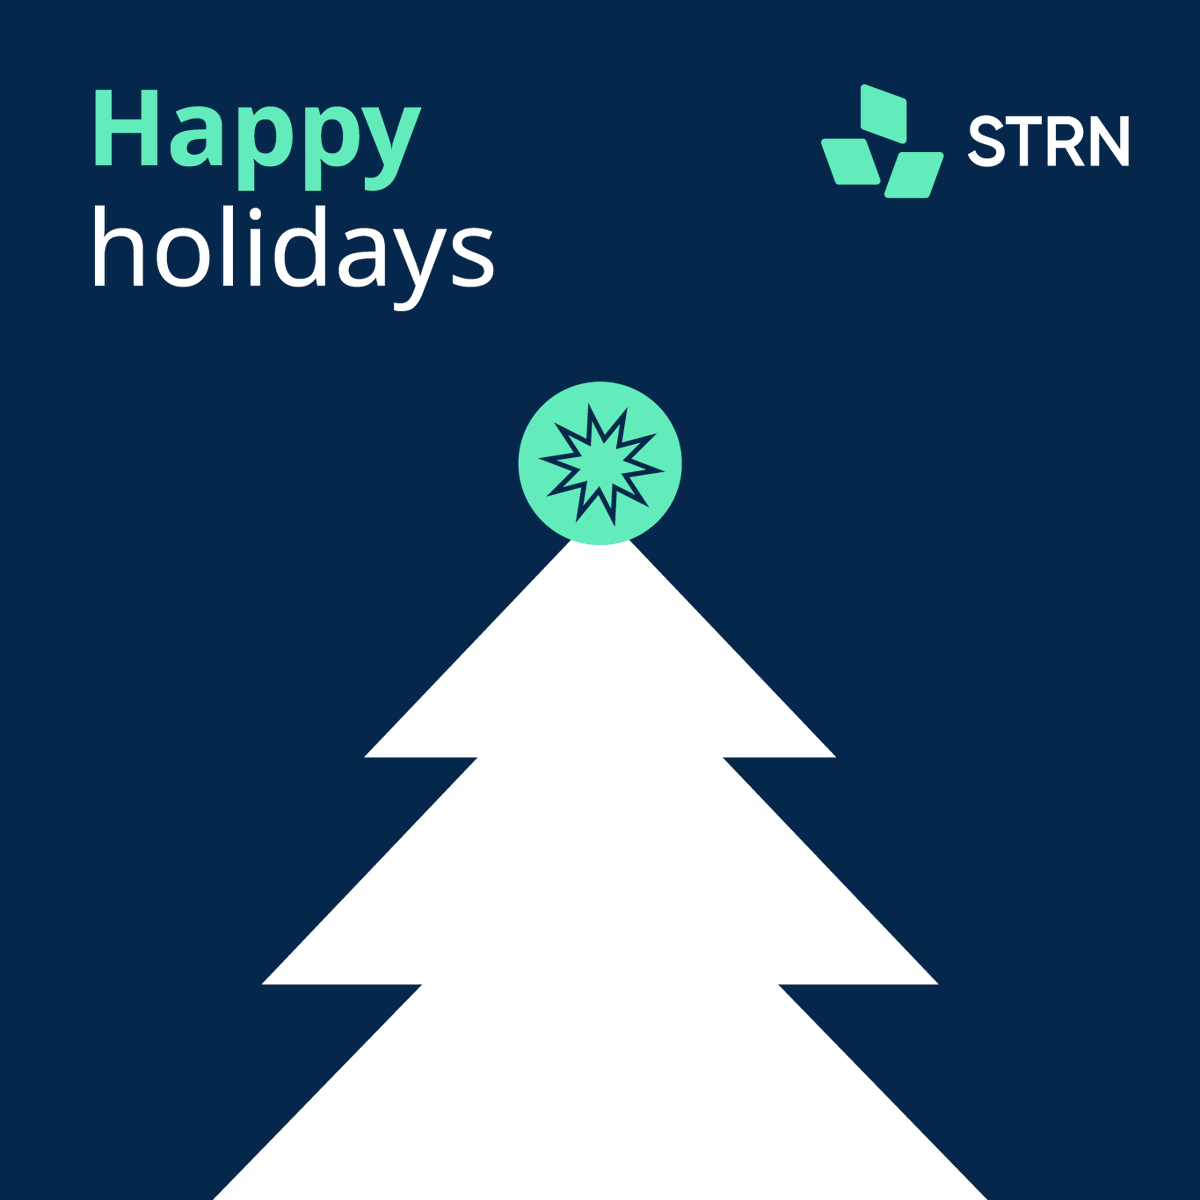 Ready, set, celebrate! 🎄🎁 Whether you're scoring goals or hitting home runs, may your holidays be filled with victories and high-fives all around. 🥇🙌 Happy holidays from the STRN team! ❄️🥂